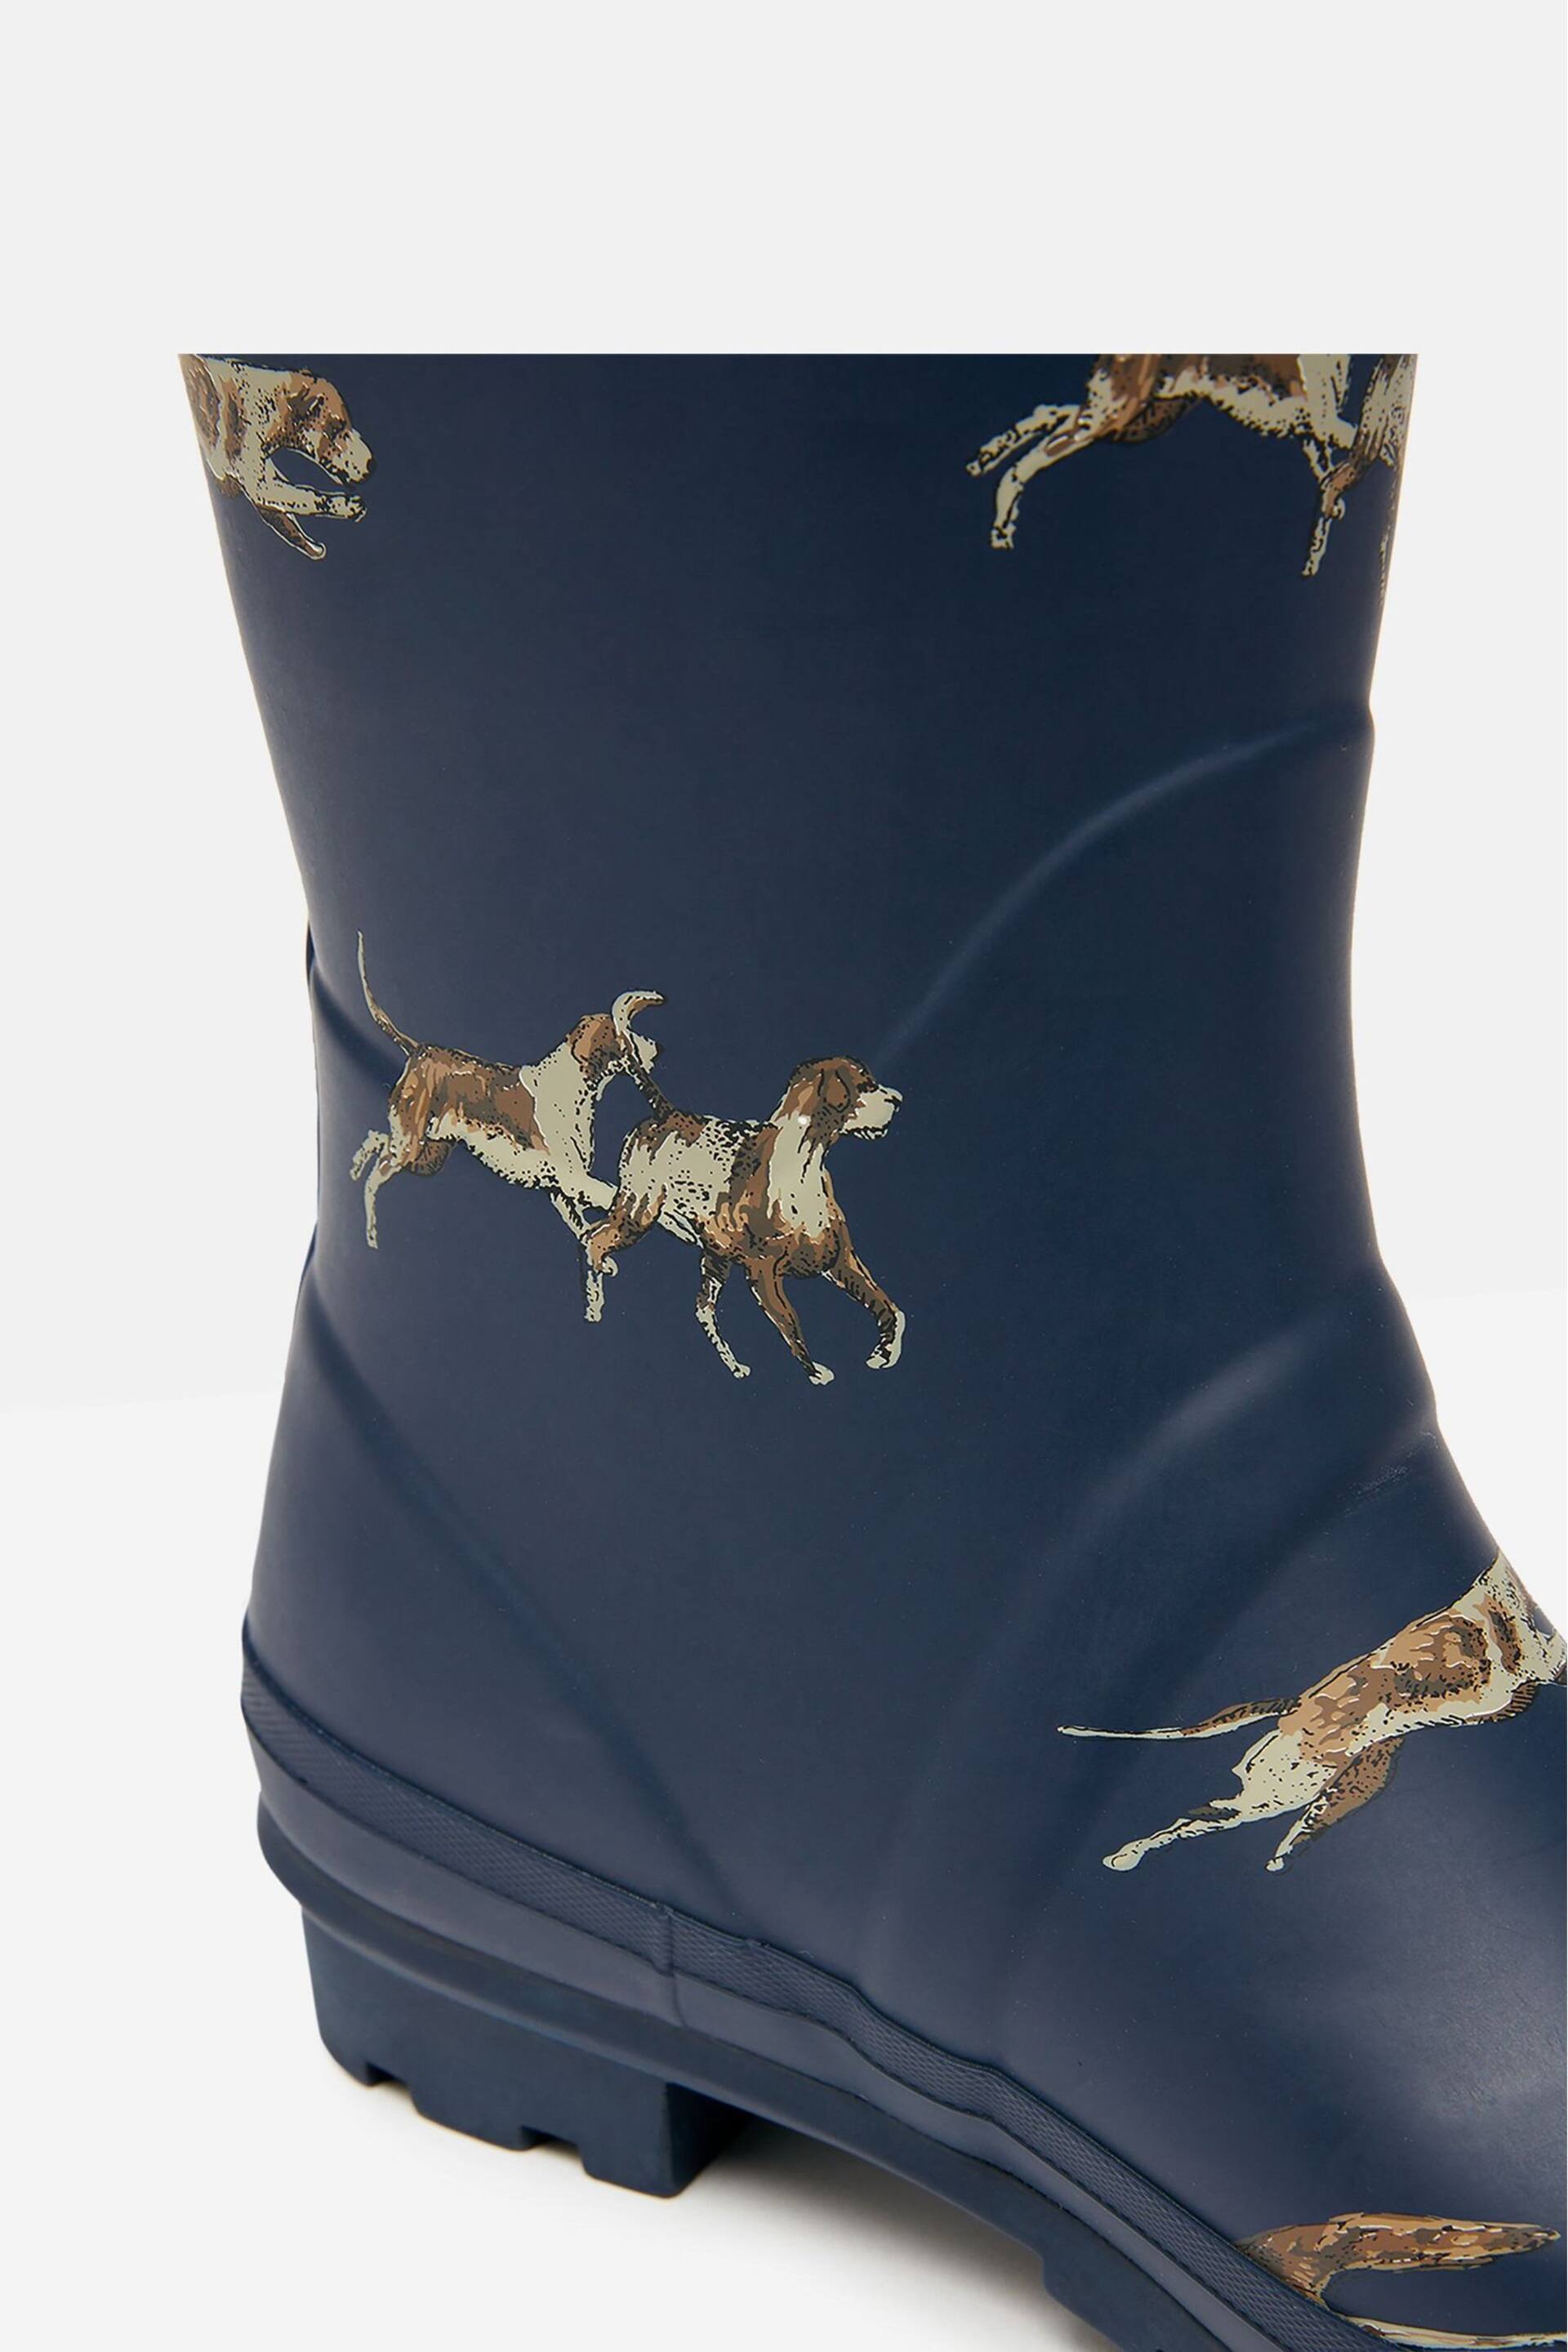 Joules Navy Blue Dog Print Adjustable Tall Wellies - Image 5 of 6